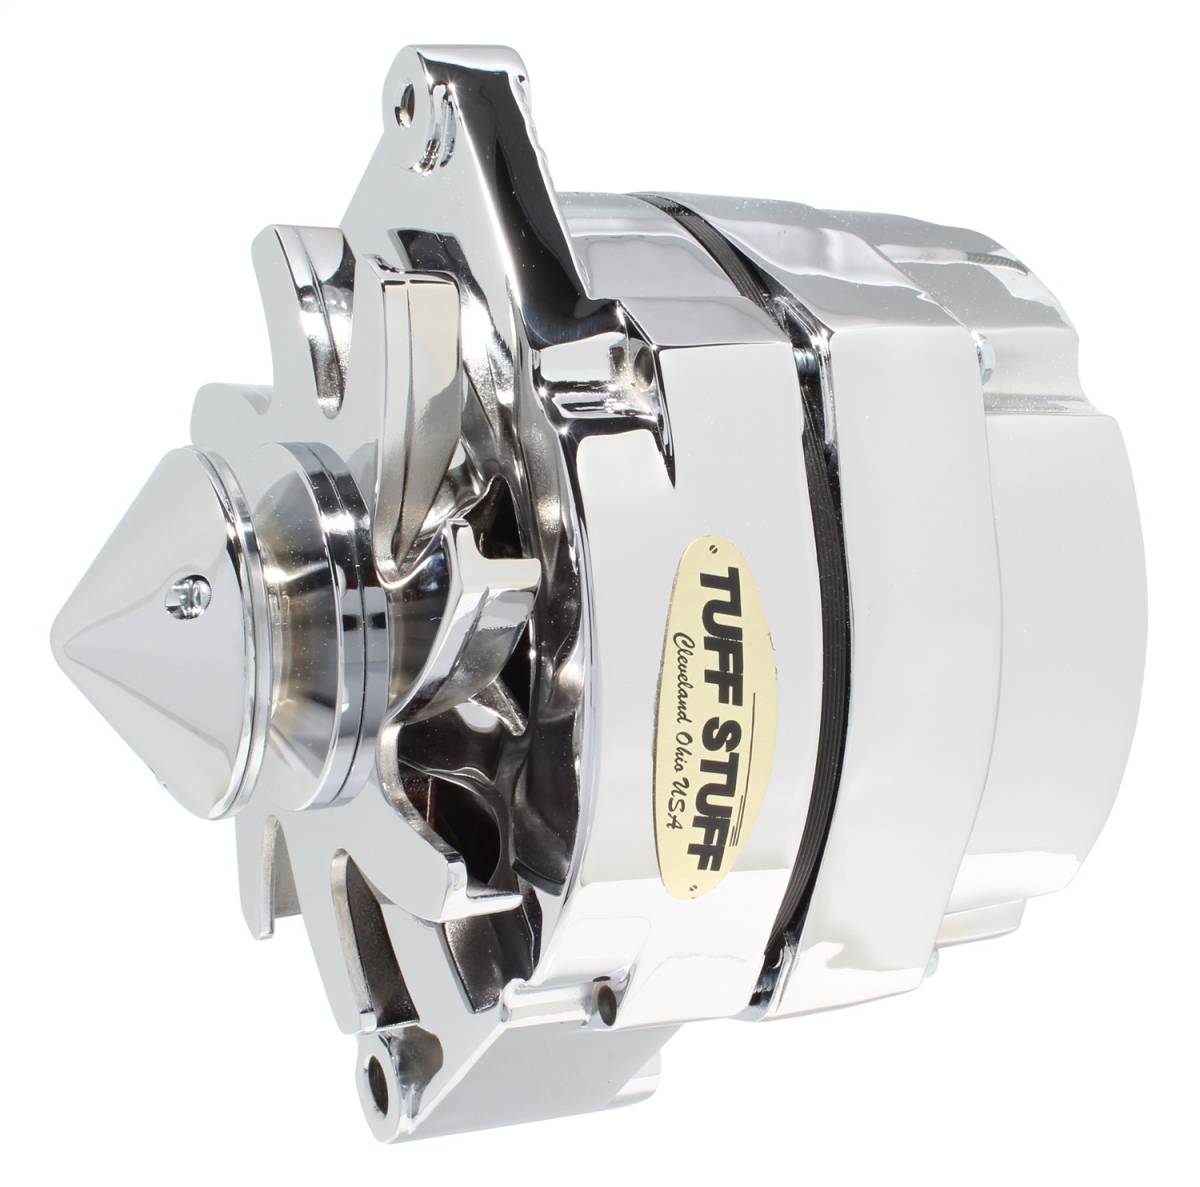 Tuff Stuff Performance - Silver Bullet Alternator 140 AMP OEM Or 1 Wire V Groove Pulley 4.85 in. Case Depth Lower Mount Boss 2 in. Long Polished 7140BBULL